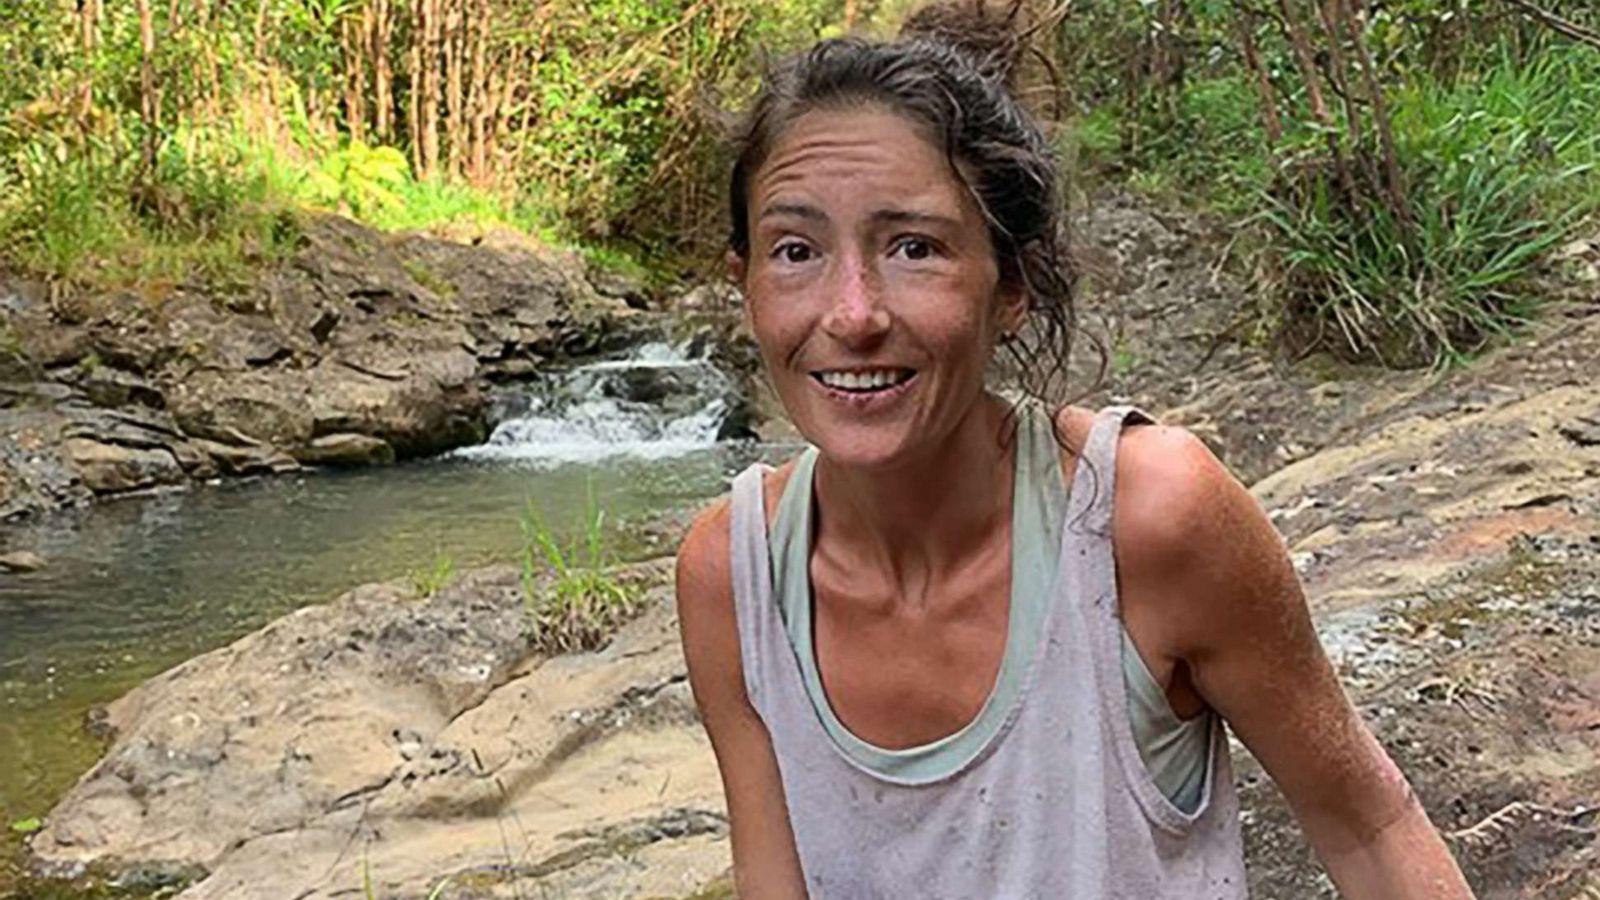 Yoga Teacher Amanda Eller After Rescue From Hawaii Forest I Images, Photos, Reviews